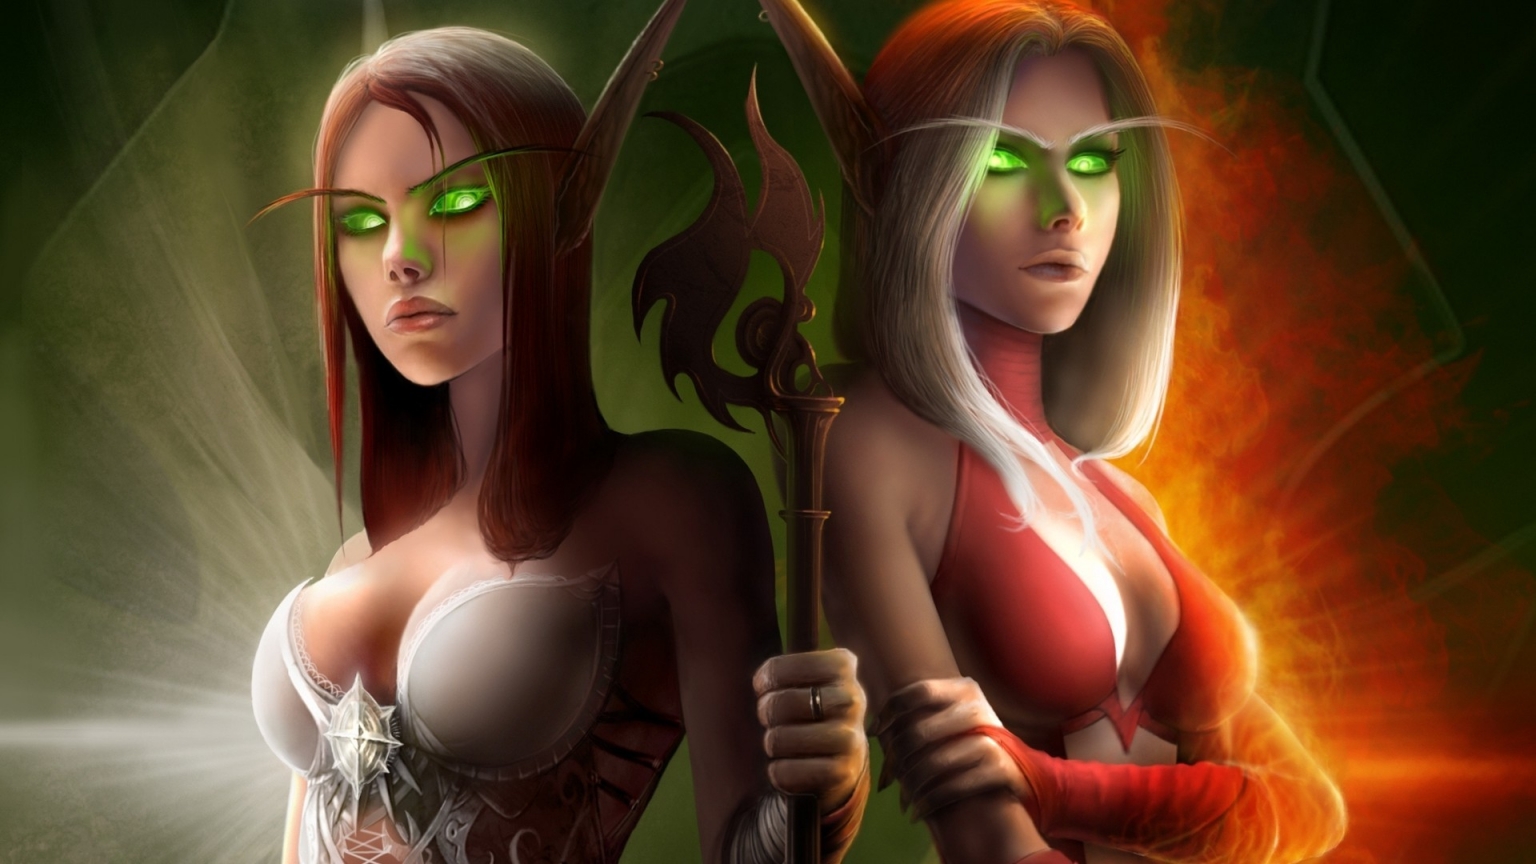 World of Warcraft Elf Costumes for 1536 x 864 HDTV resolution